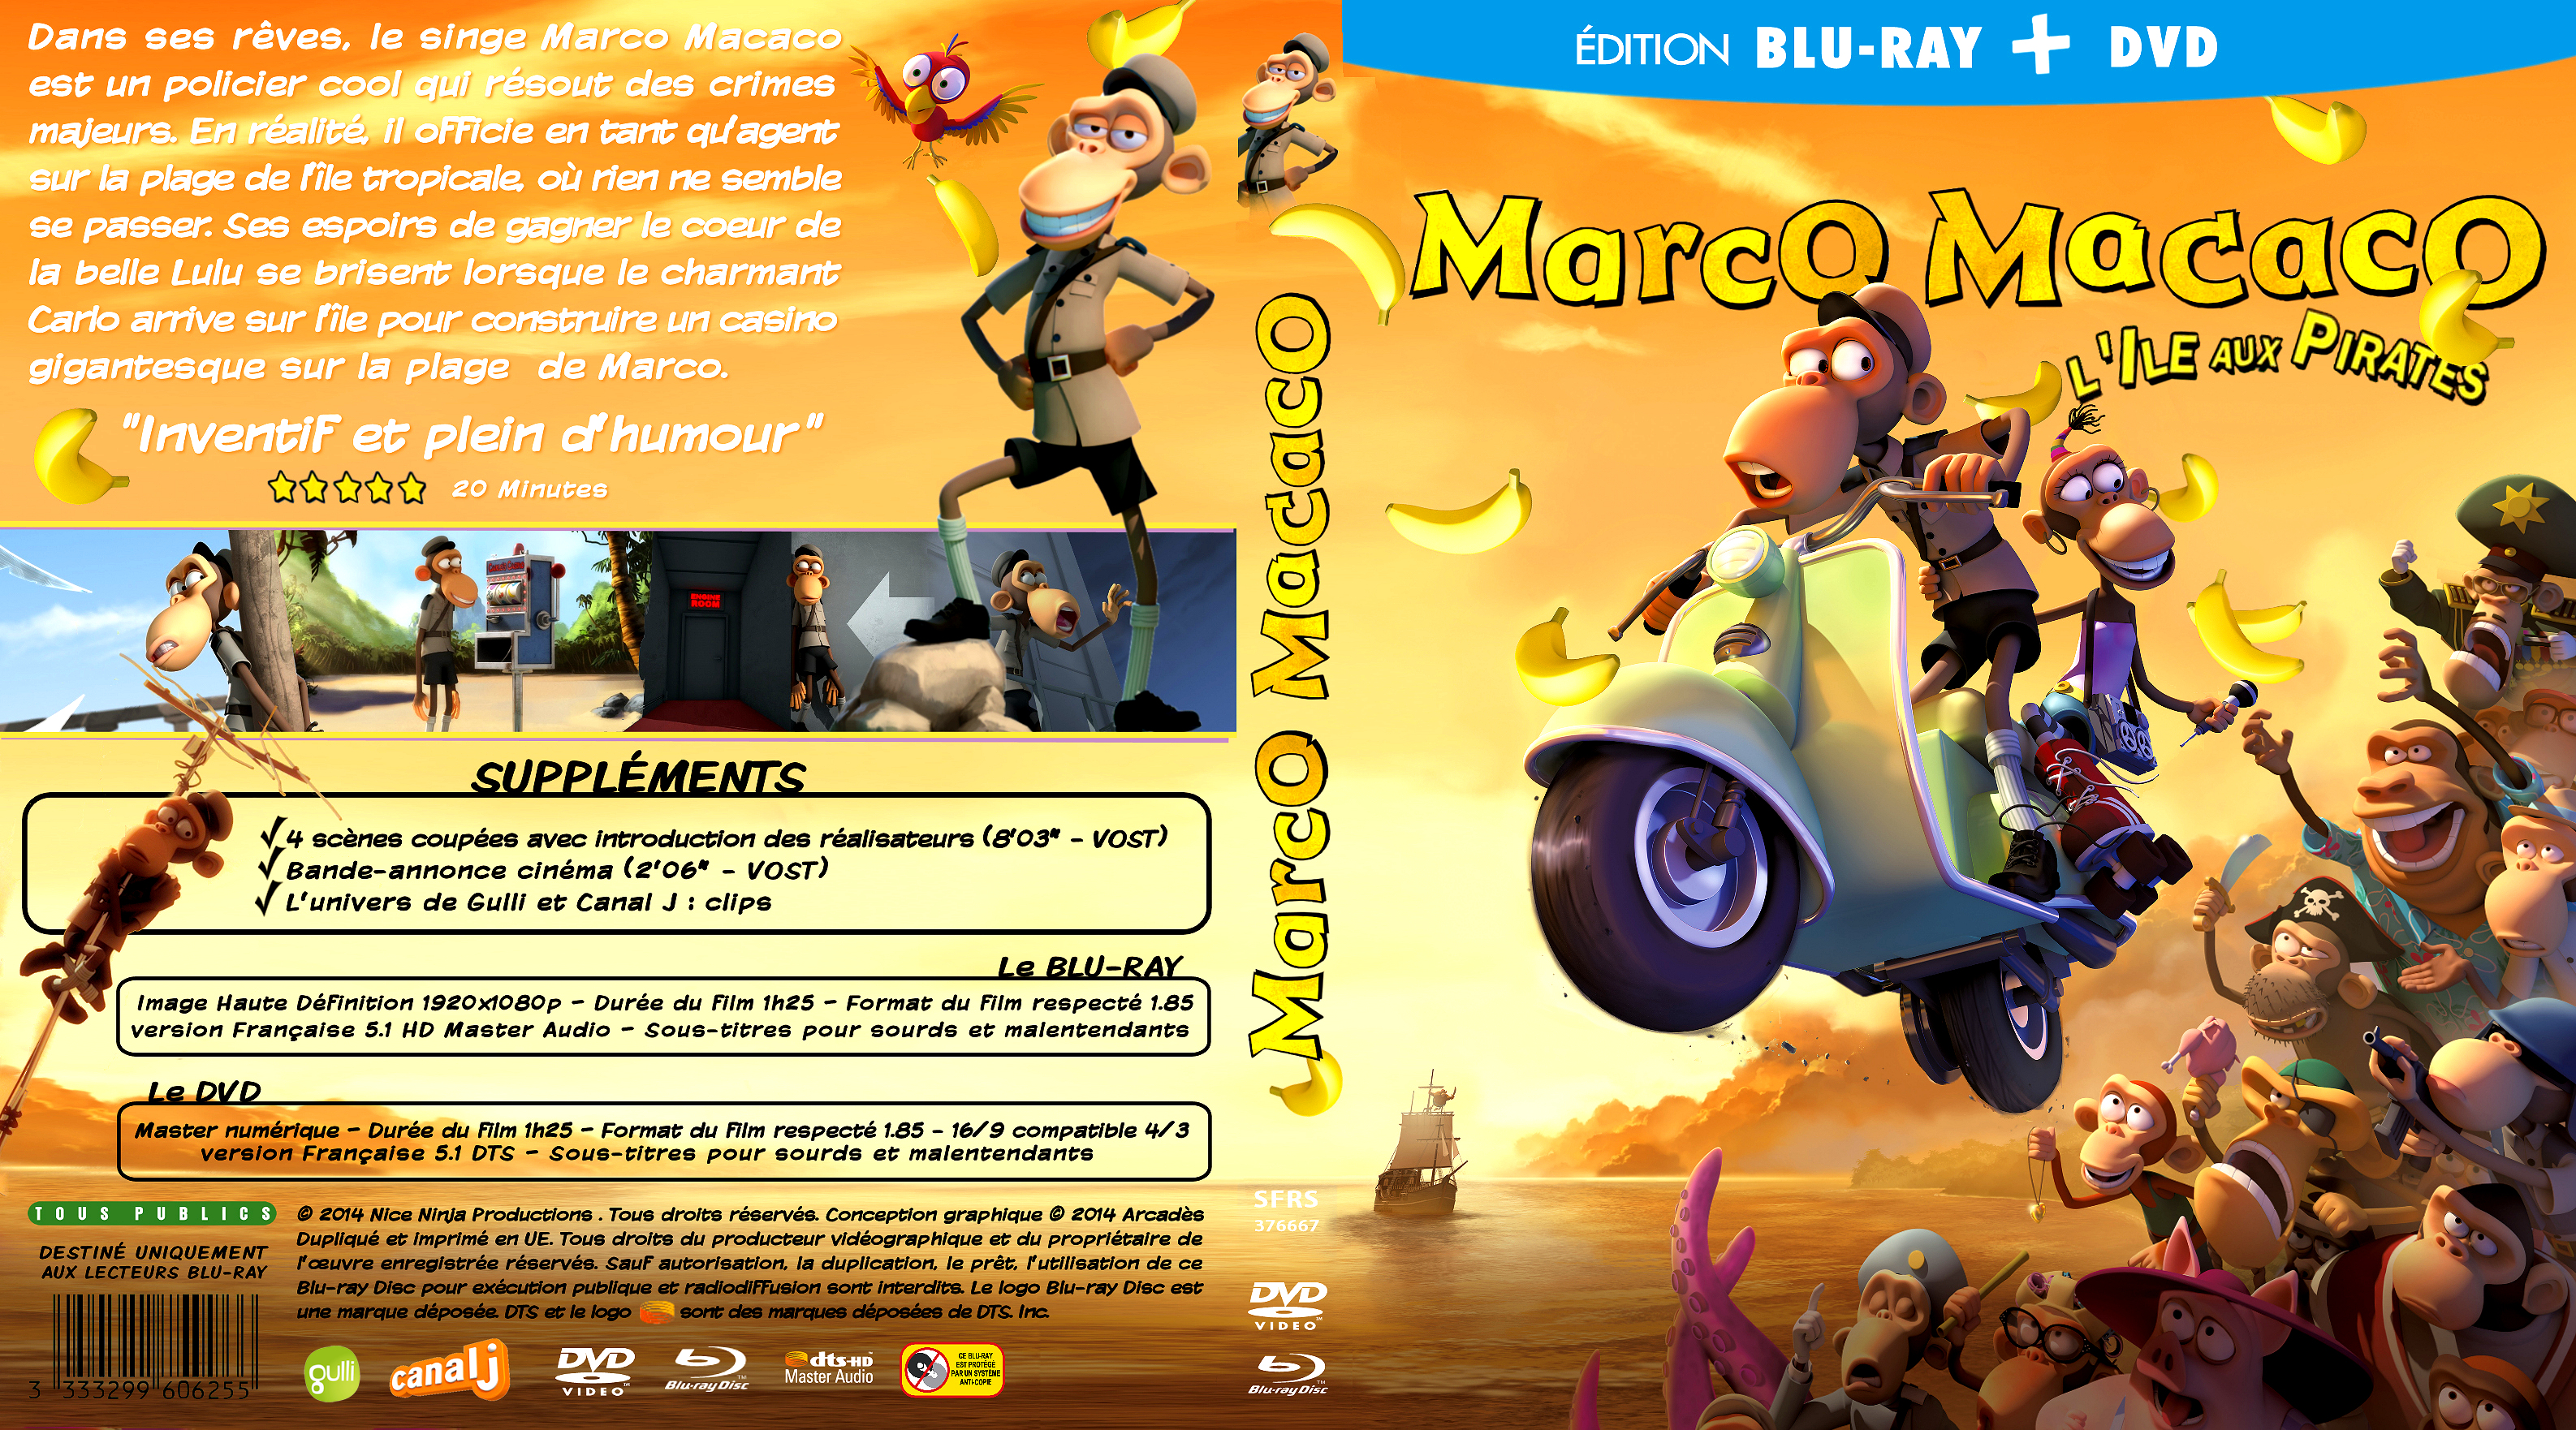 Jaquette DVD Marco Macaco - L